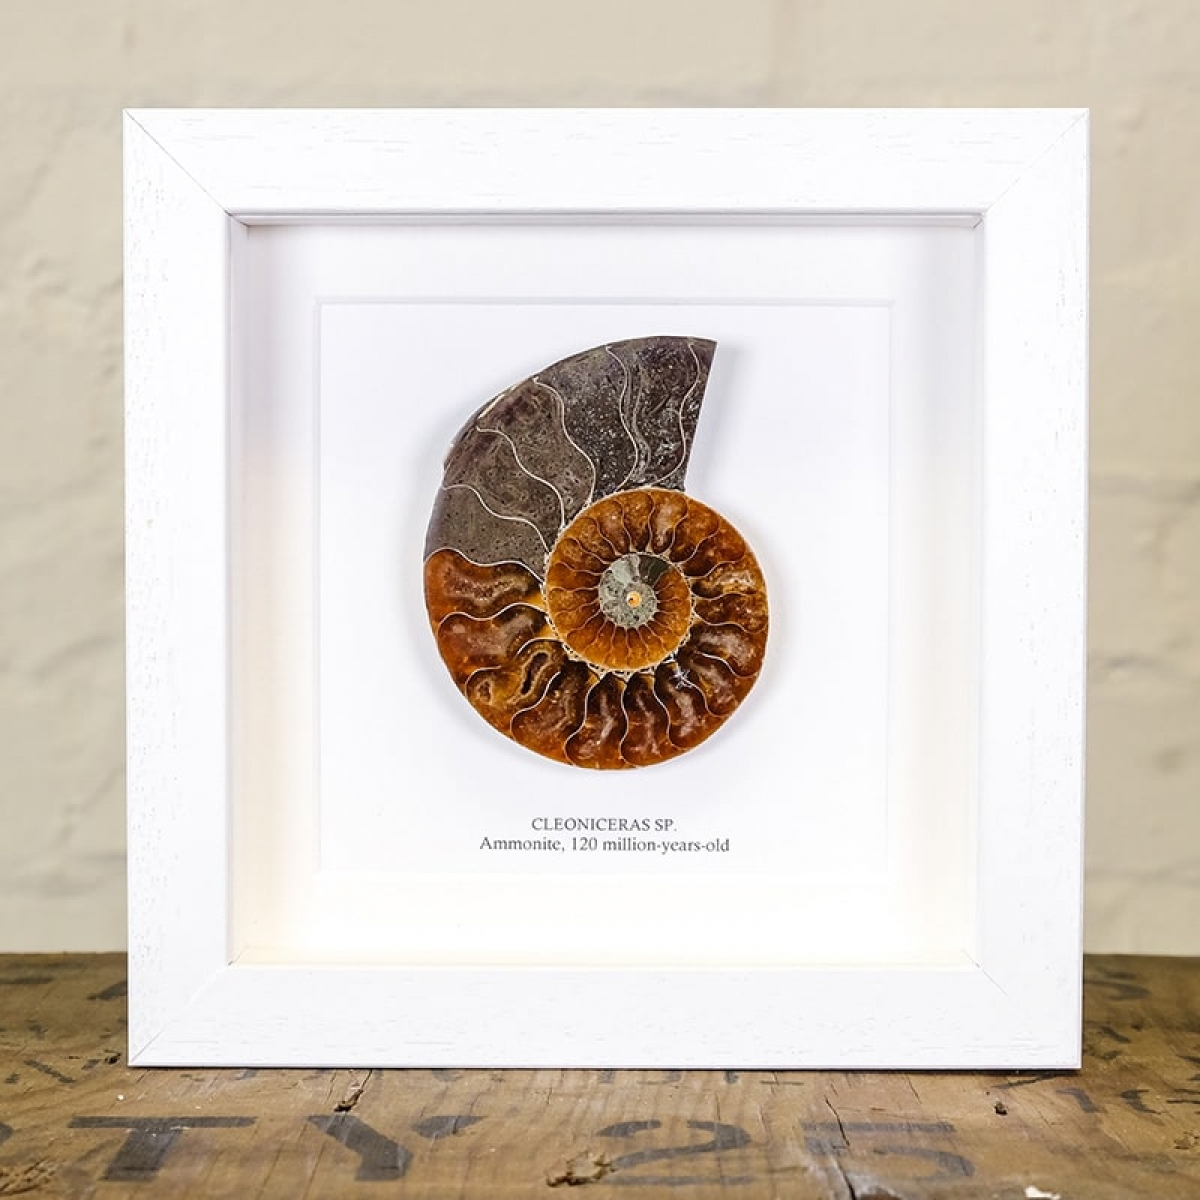 Ammonite Cut and Polished Fossil in Box Frame (Cleoniceras sp) - Specimen #06